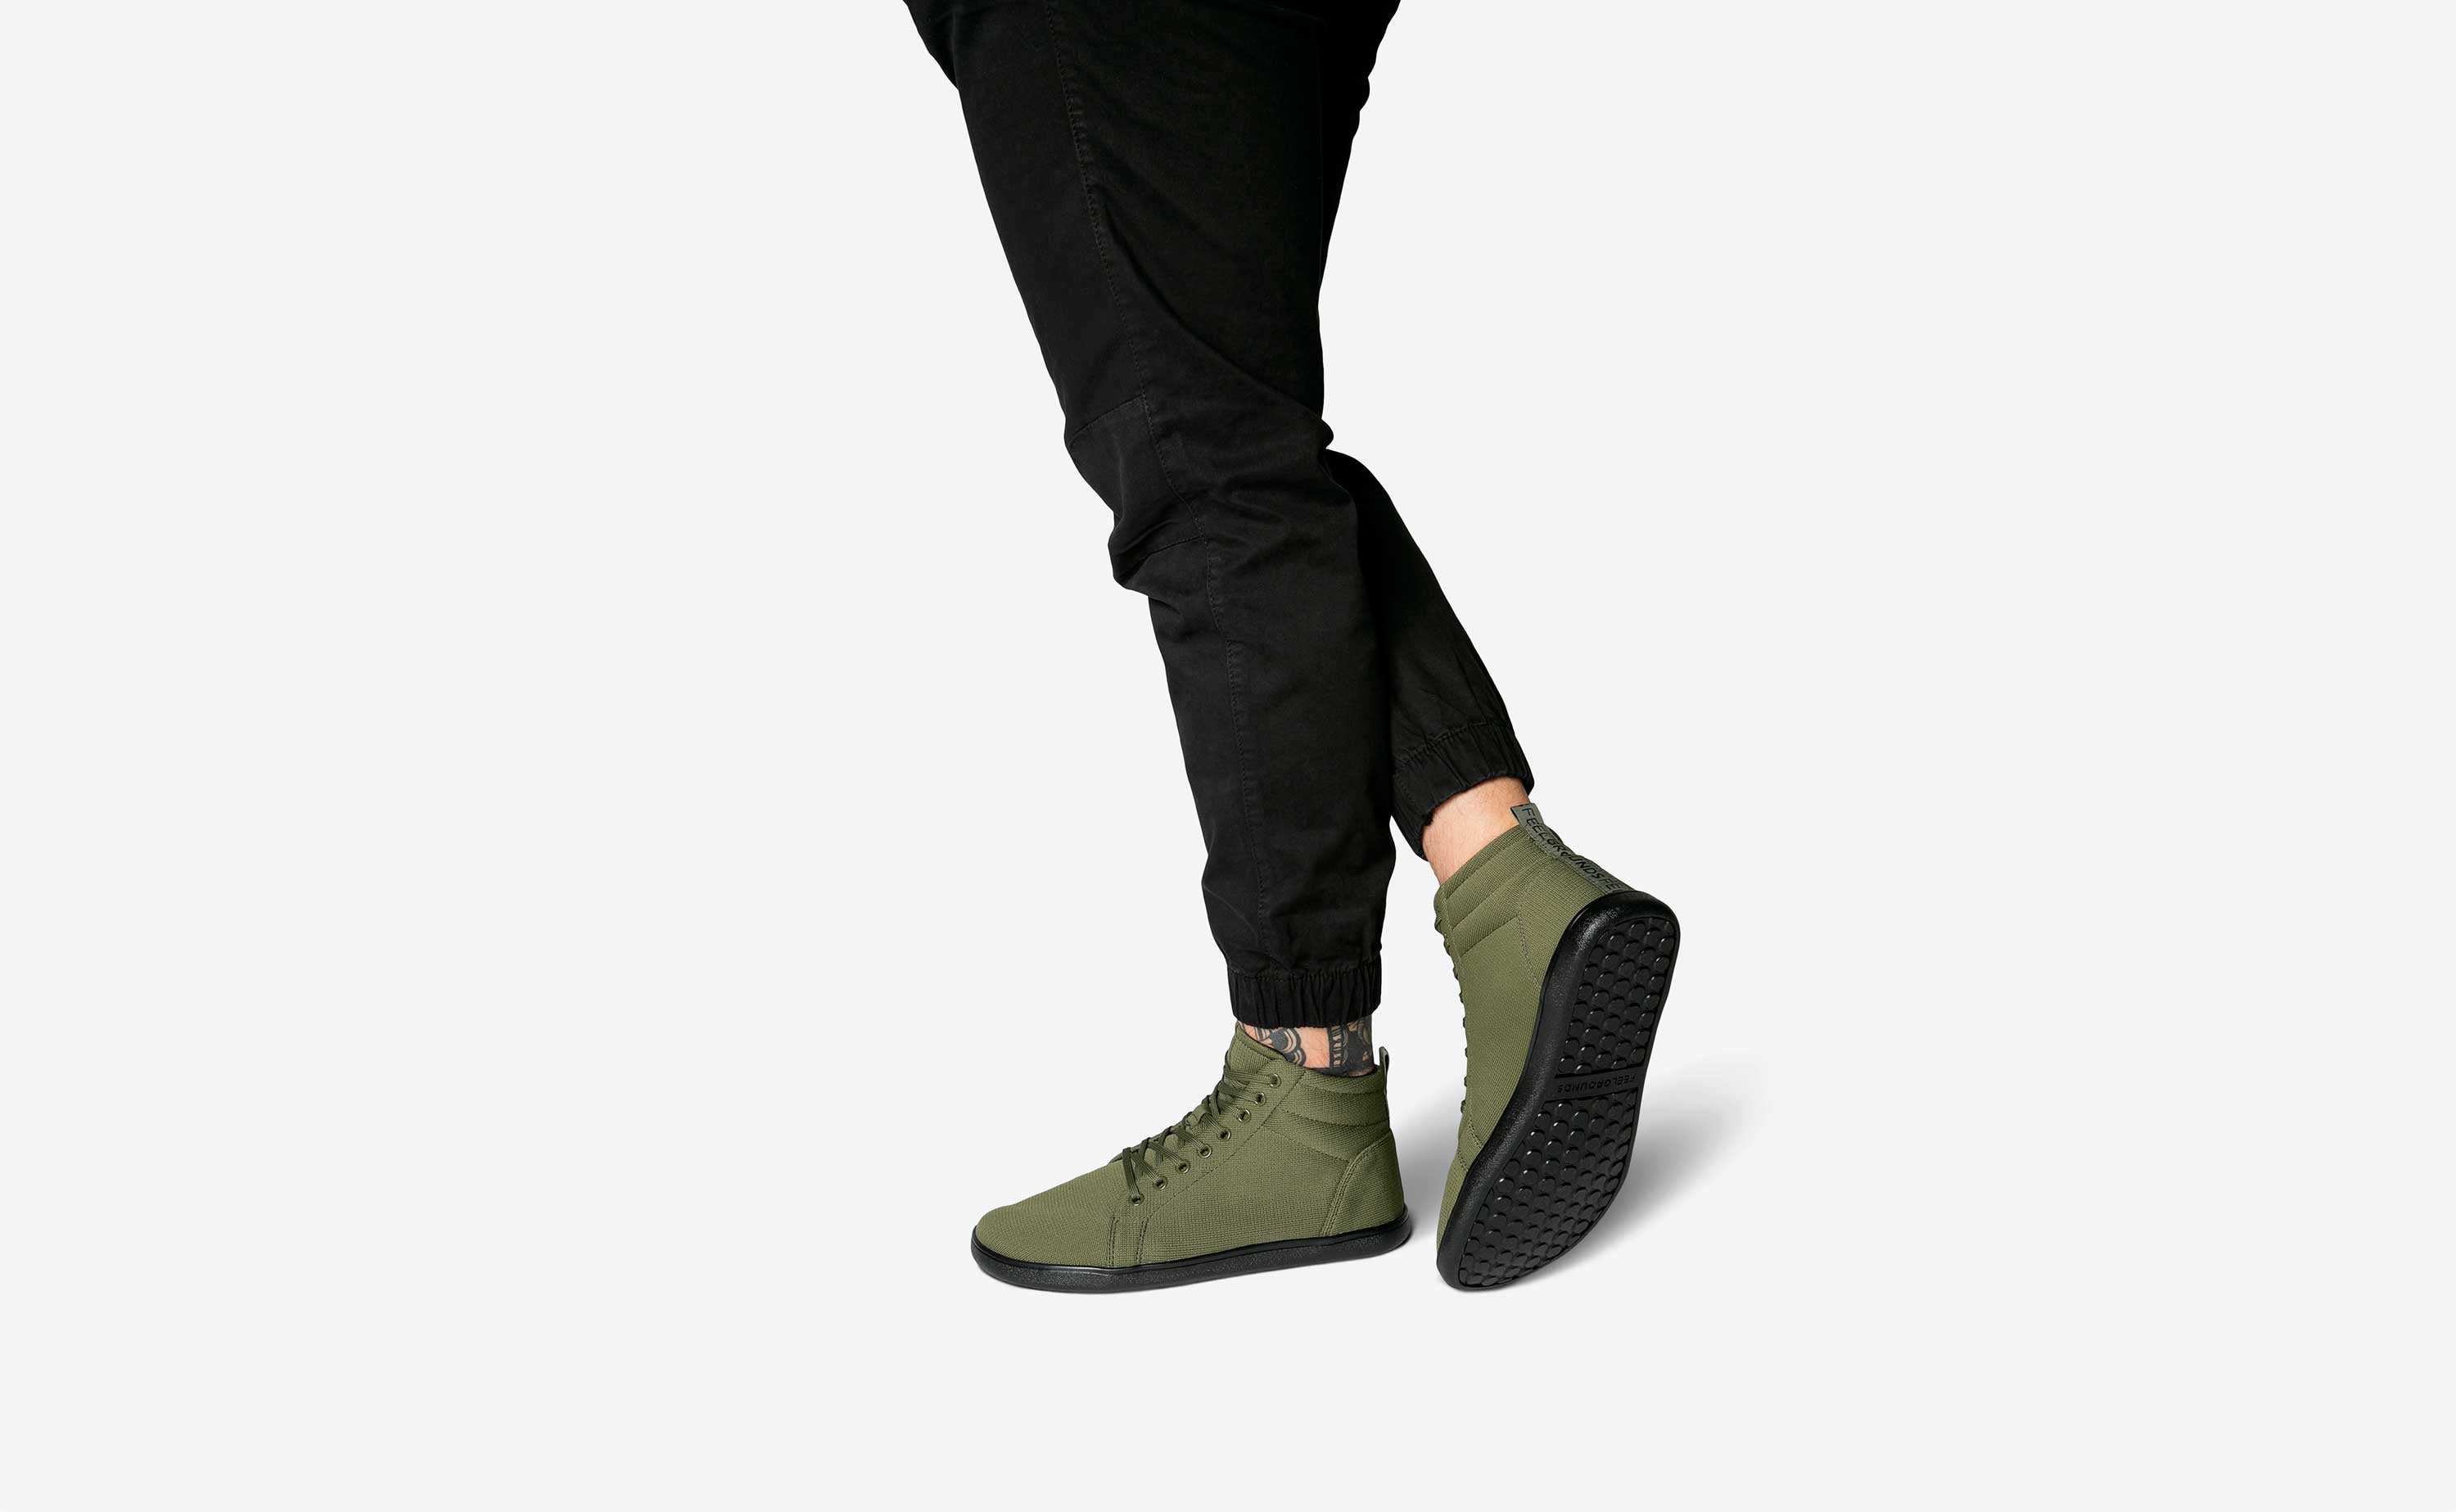 (Discontinued) Highrise Knit - Olive Green